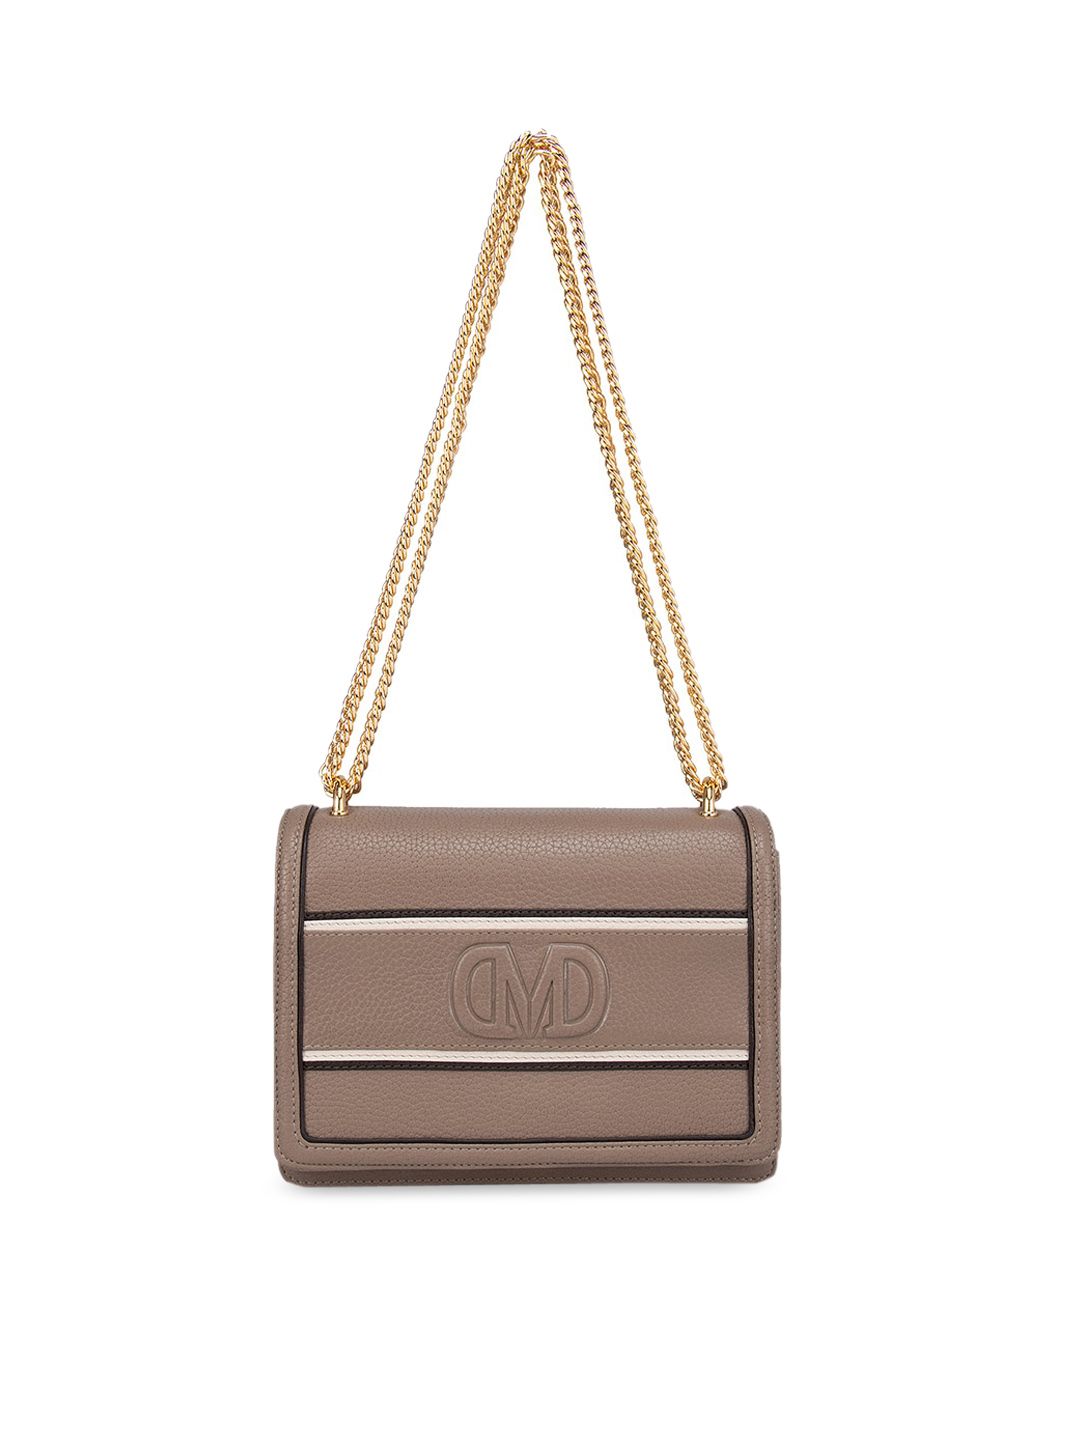 Da Milano Brown Leather Structured Sling Bag with Tasselled Price in India